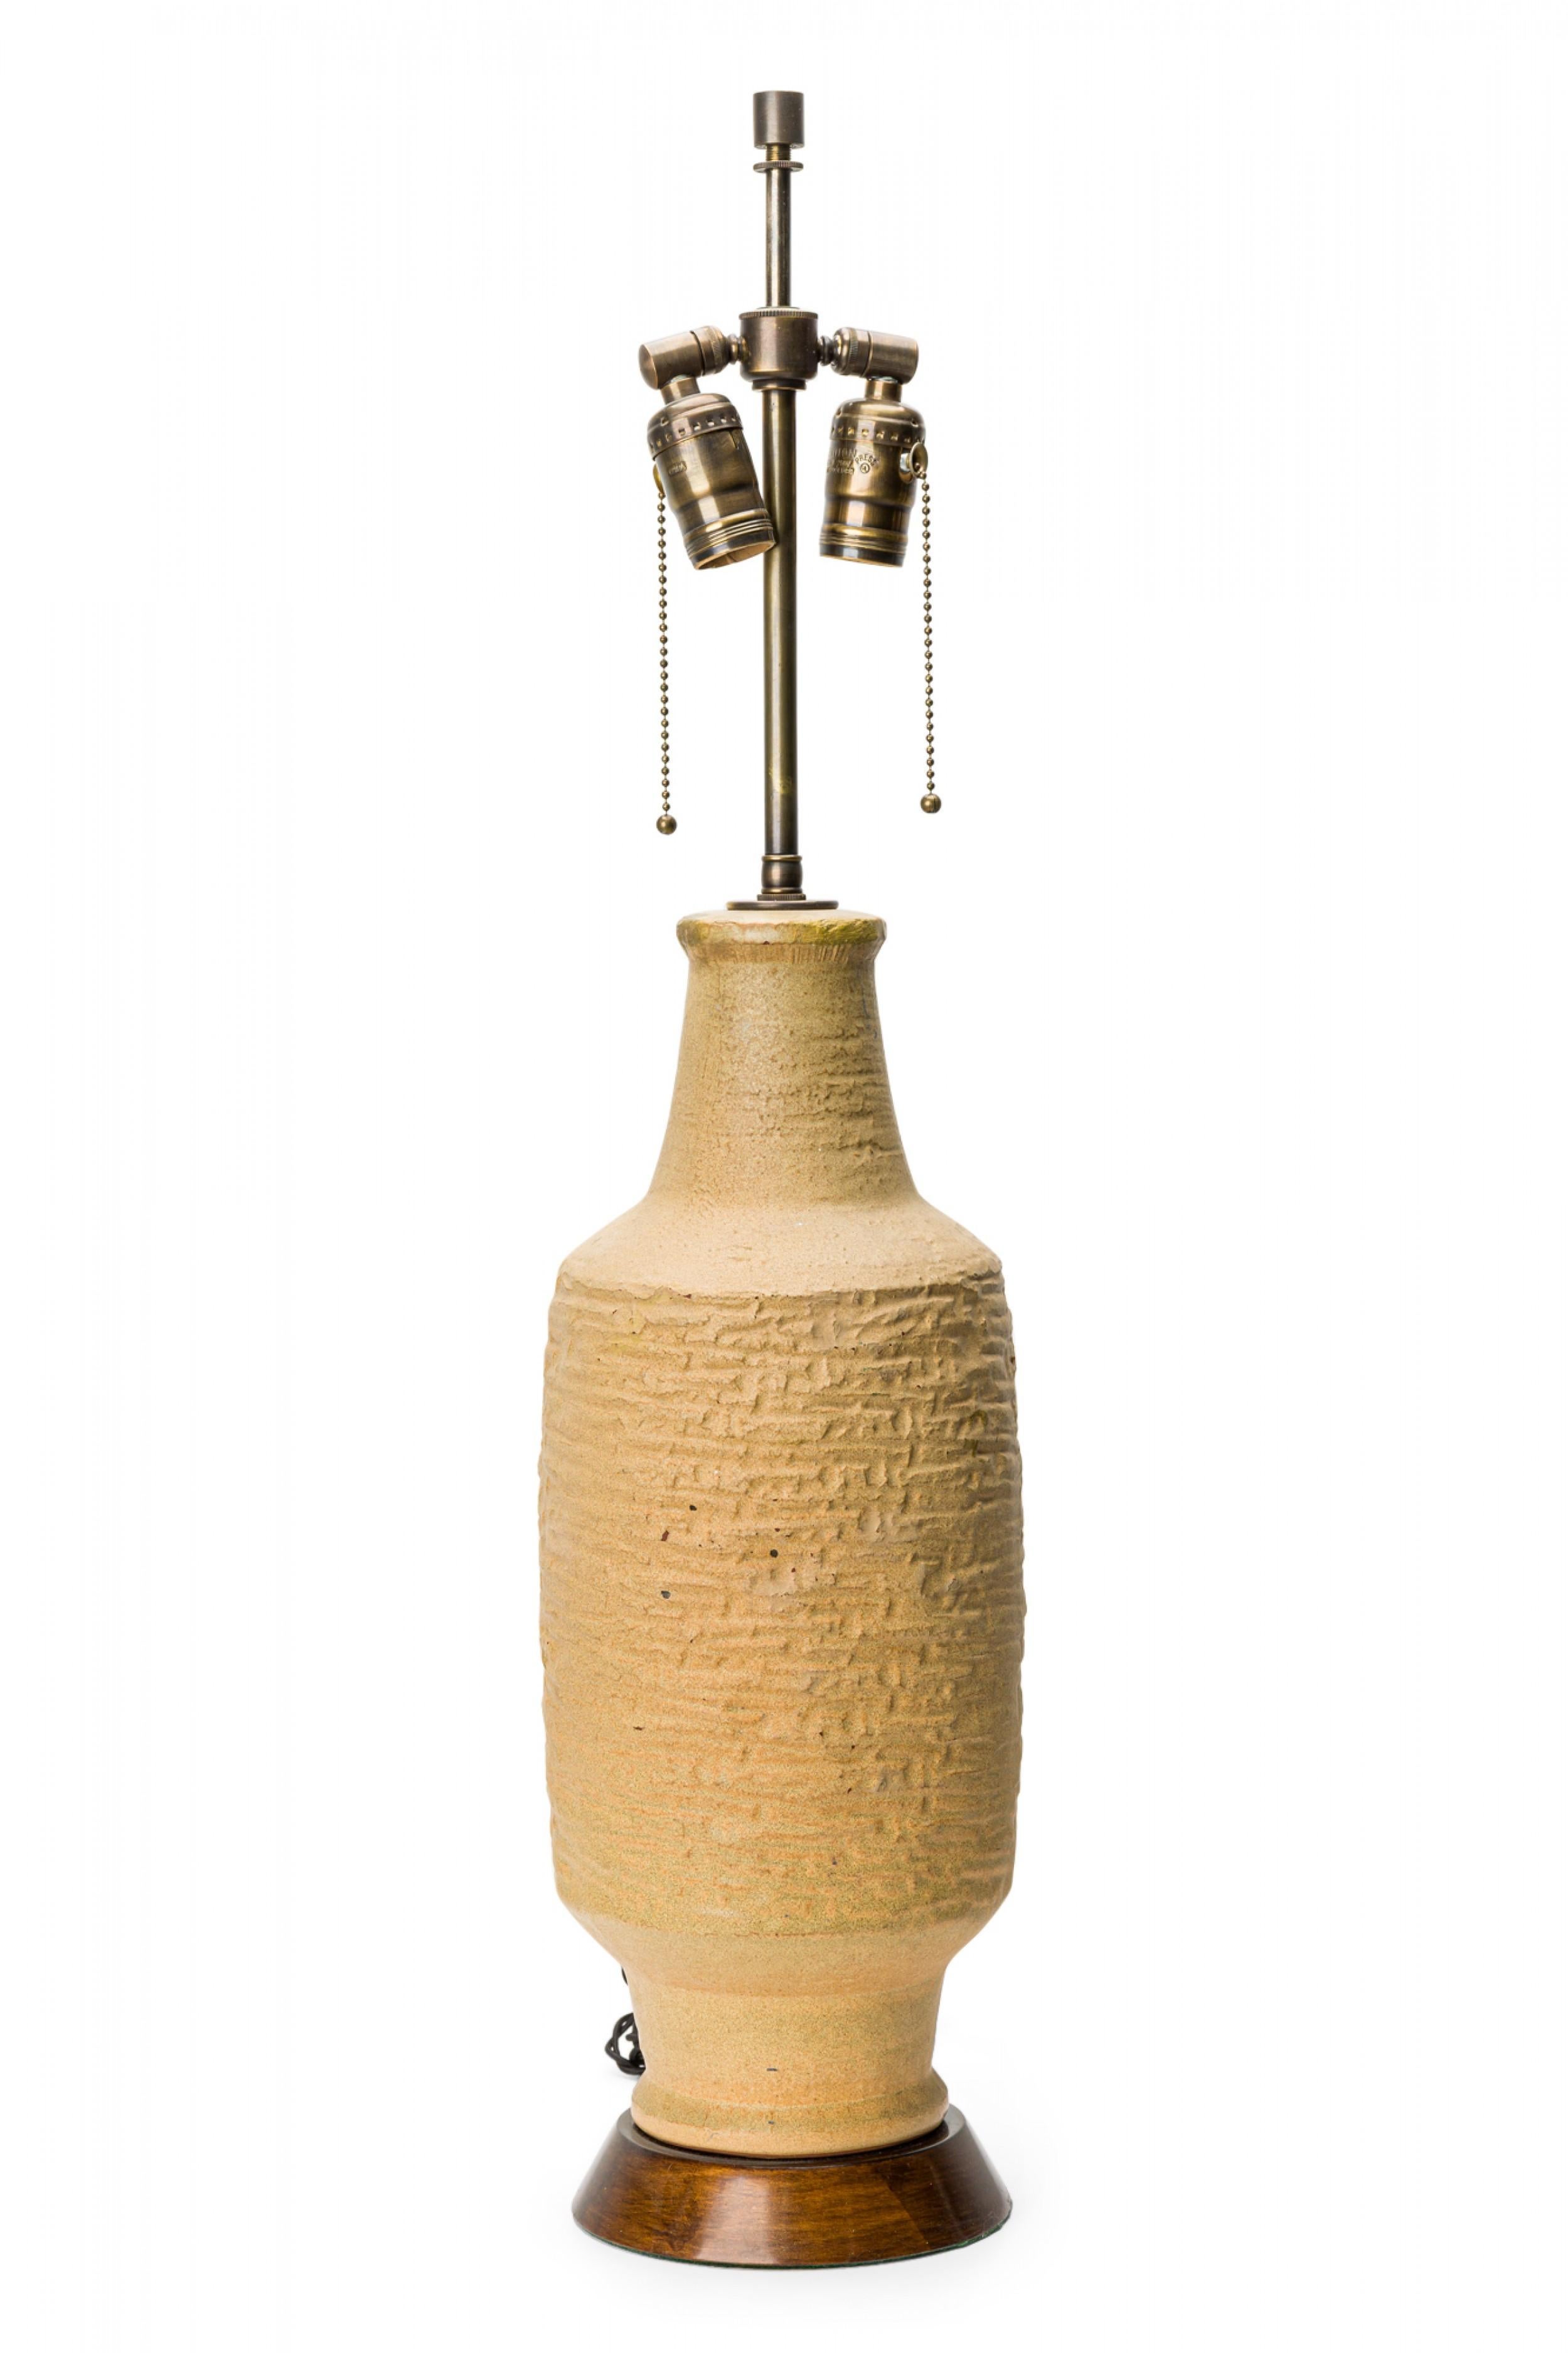 PAIR of Mid-Century cylindrical table lamps with textured beige ceramic forms resting on a round wood base. (DESIGN TECHNICS)(PRICED AS PAIR).